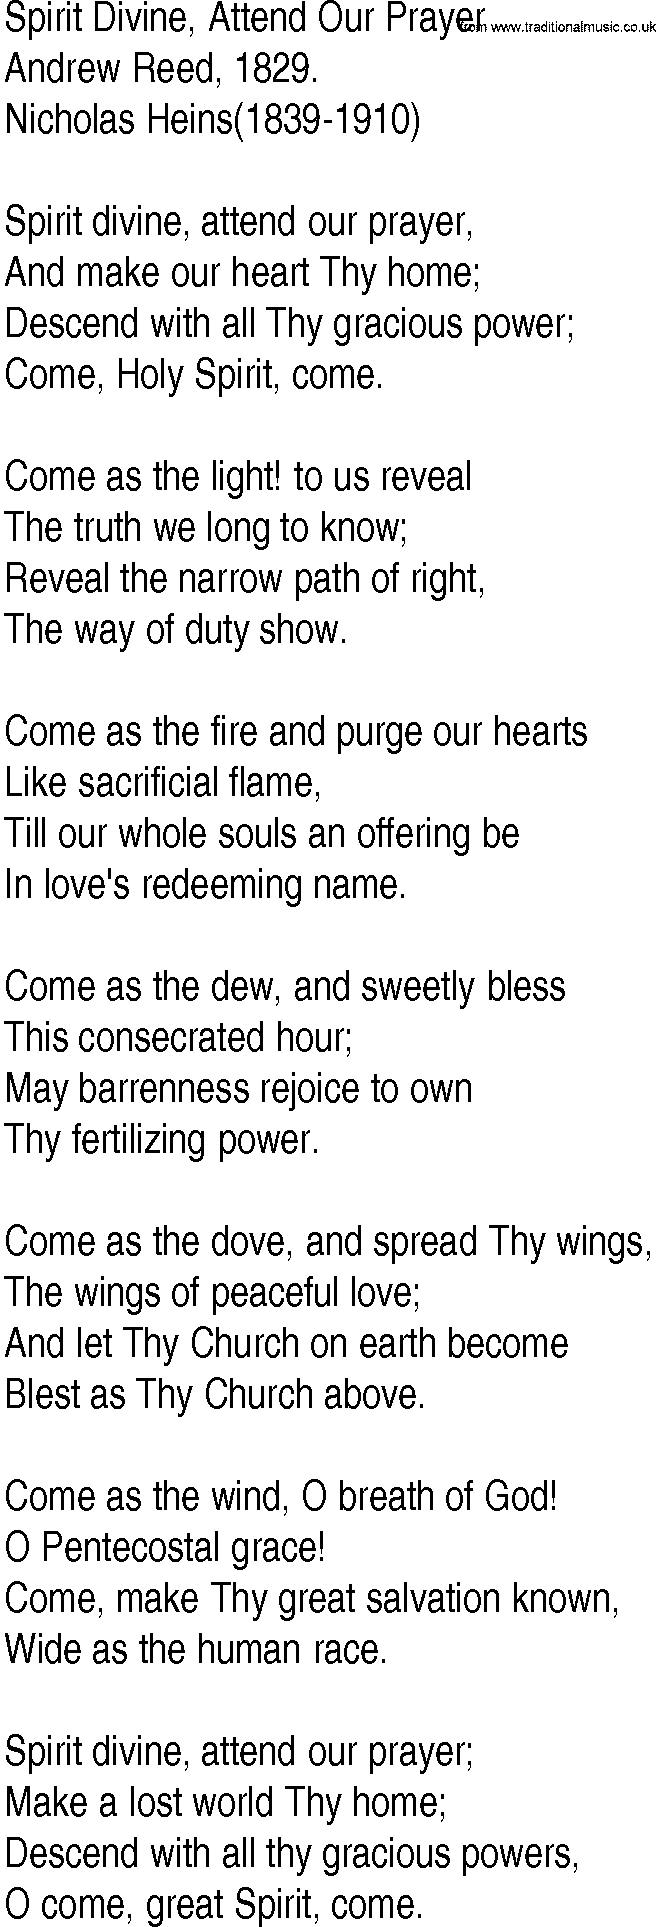 Hymn and Gospel Song: Spirit Divine, Attend Our Prayer by Andrew Reed lyrics